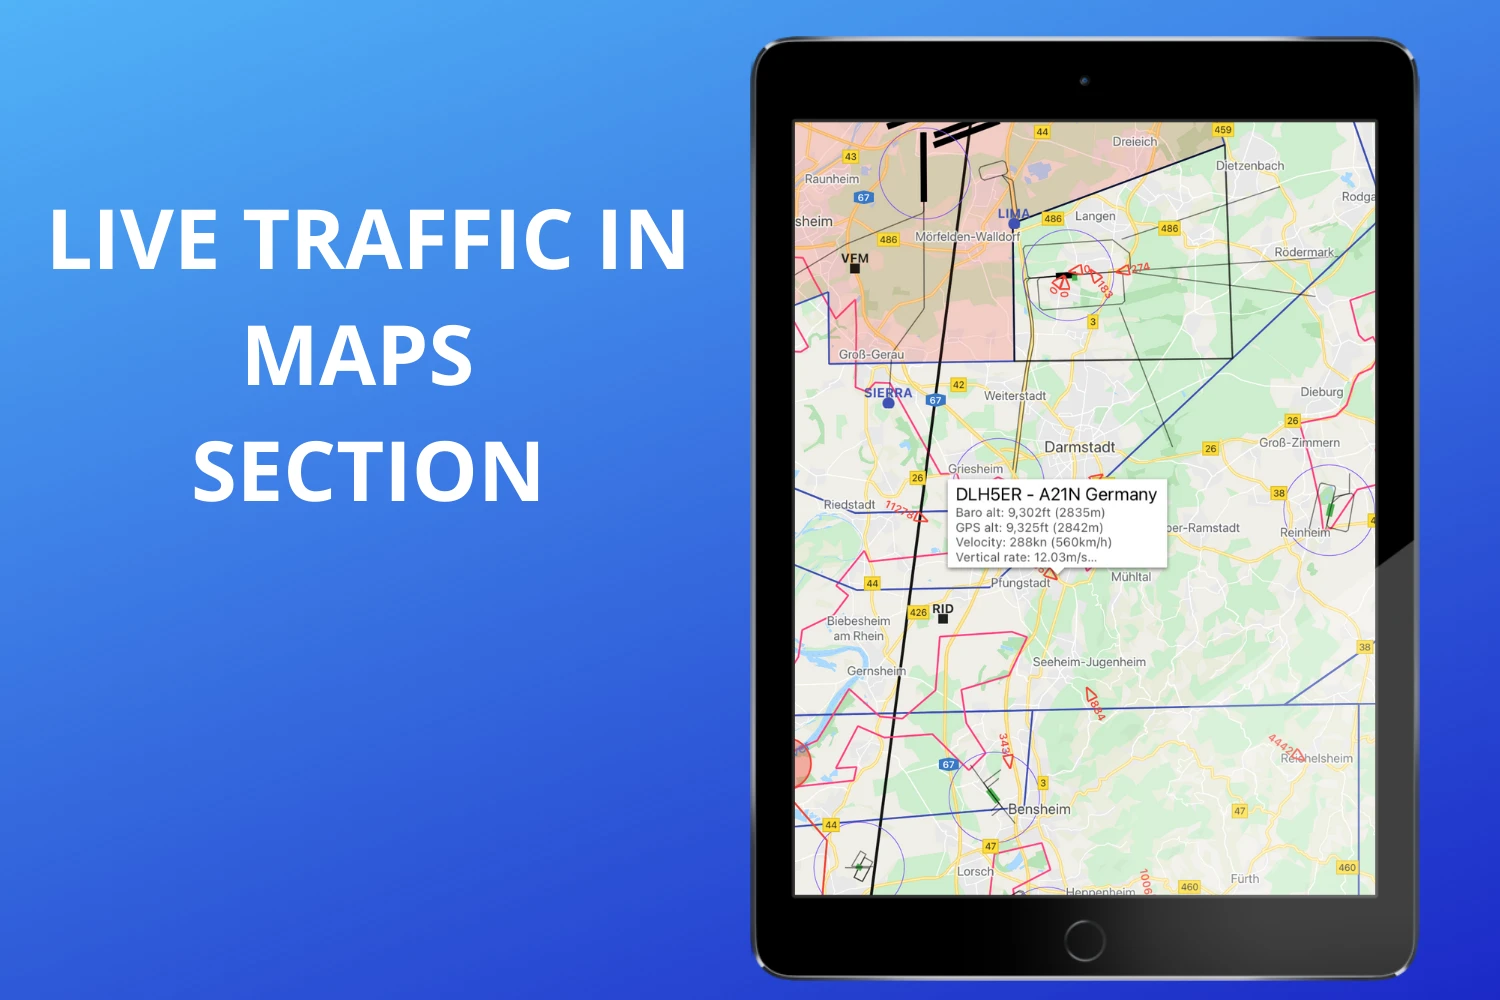 Live traffic in Maps